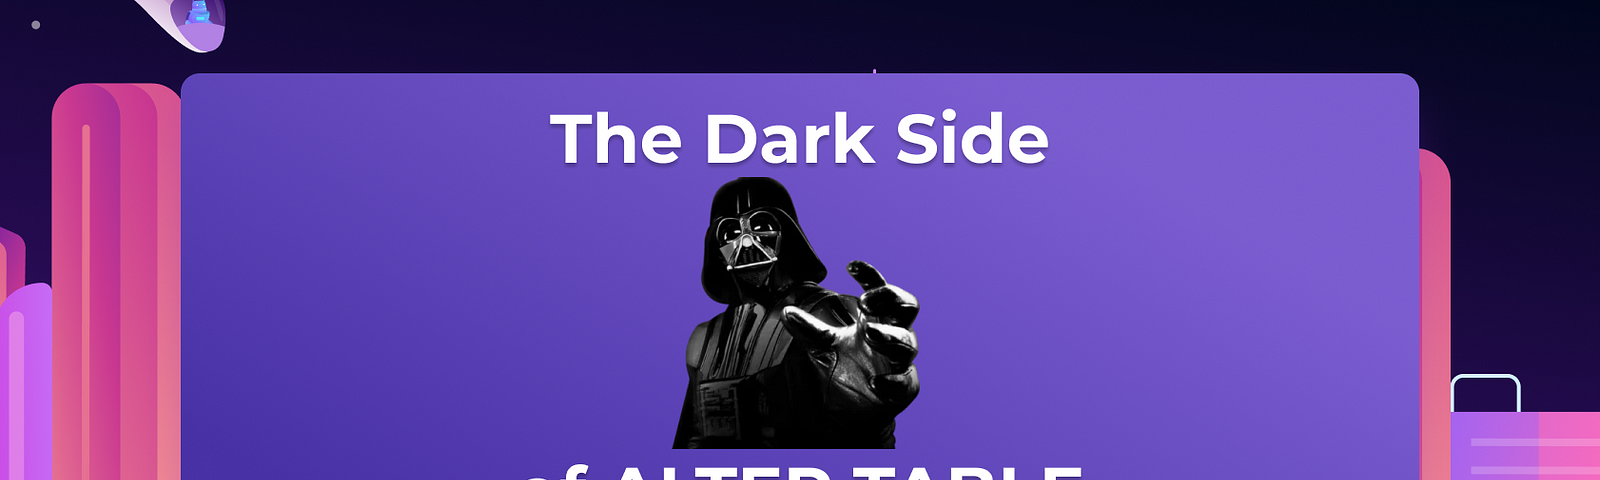 The Darker Side of ALTER TABLE: A Guide